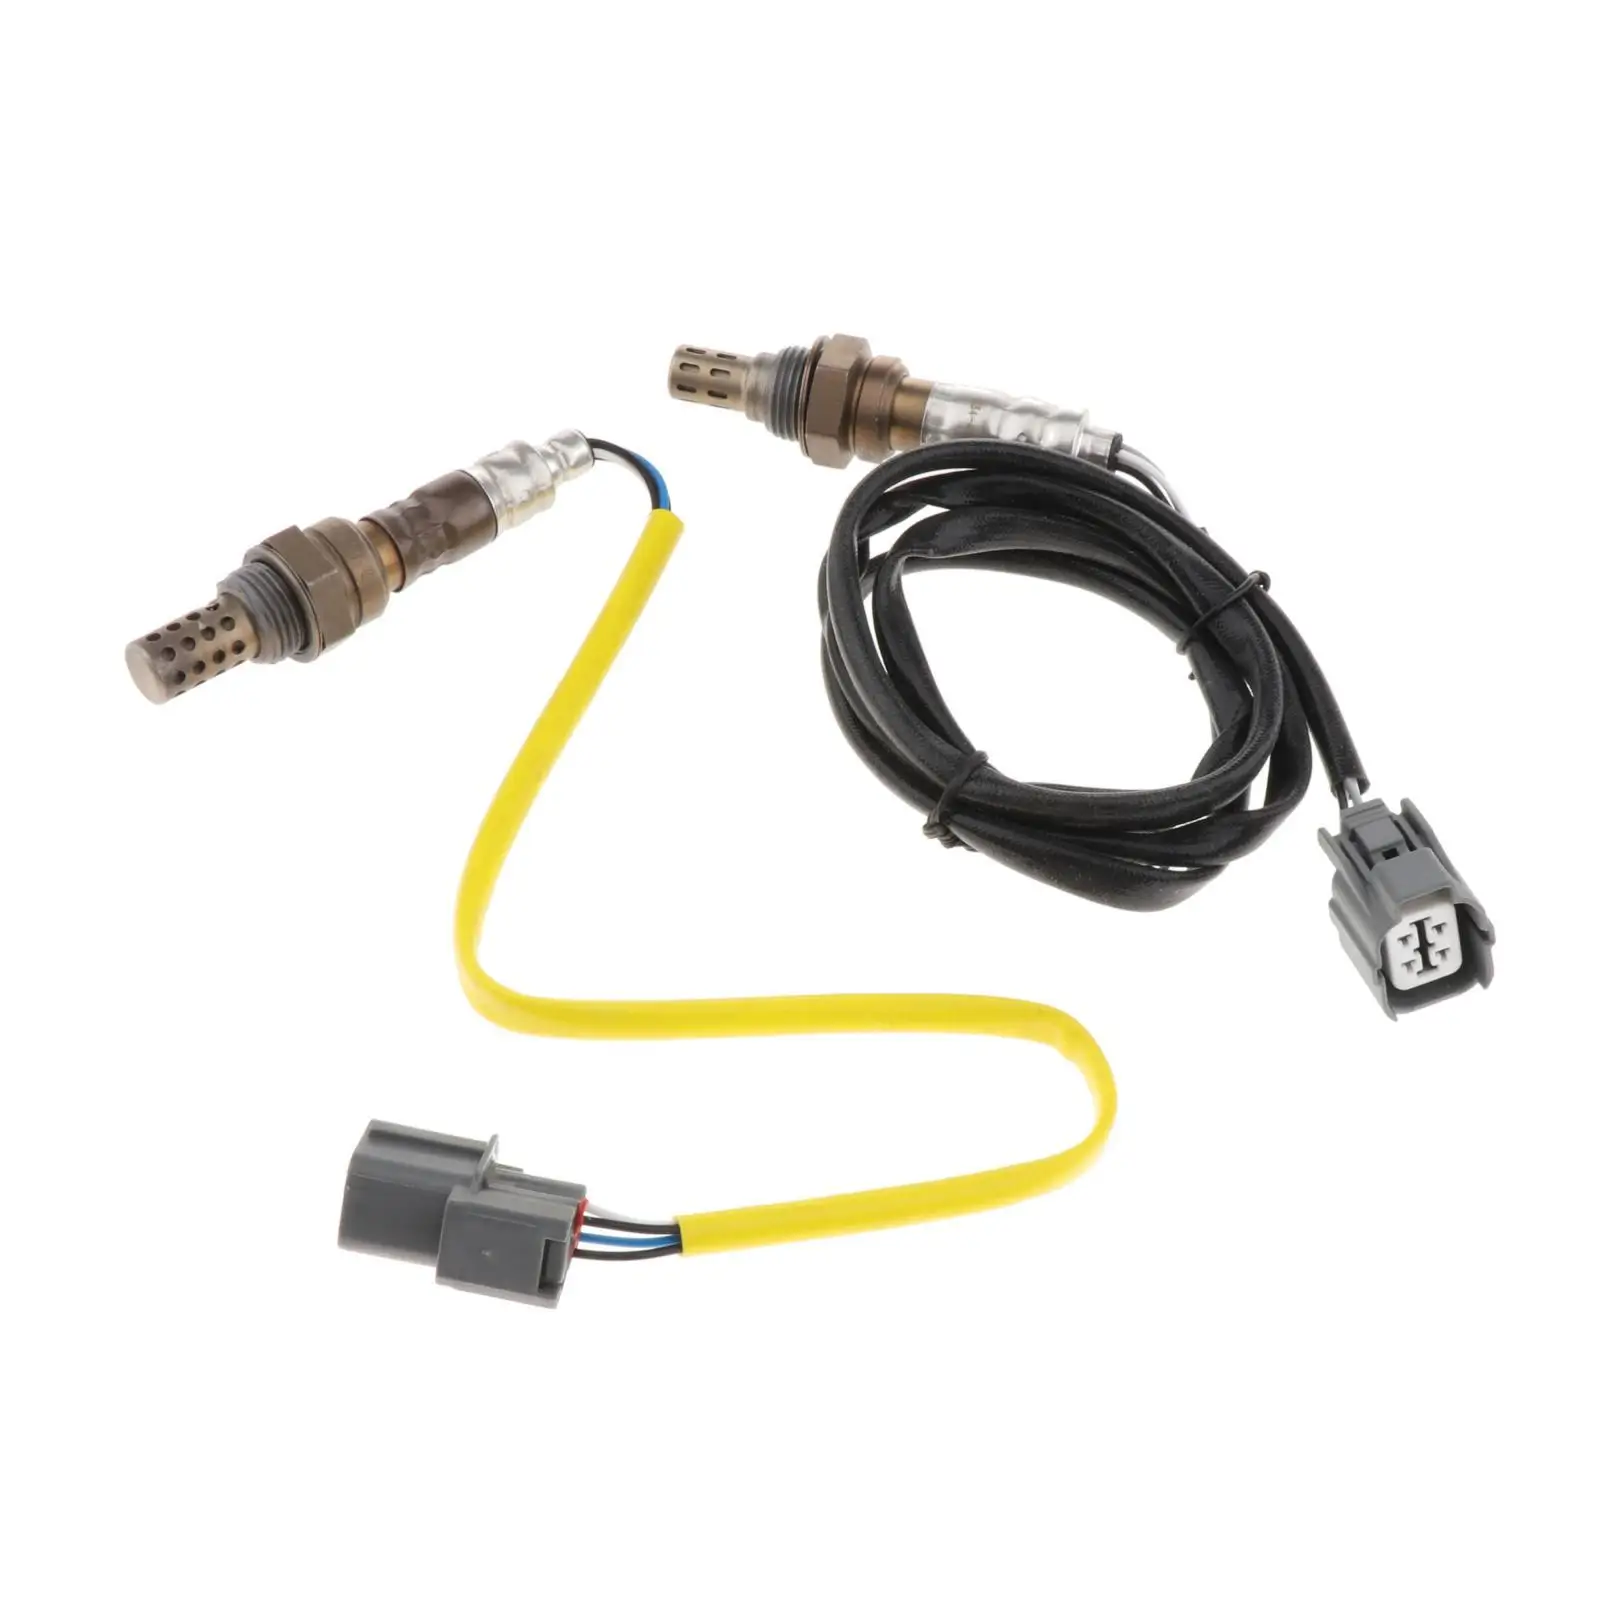 2PCS Oxygen Sensor Upper & Under Replacement for High-quality